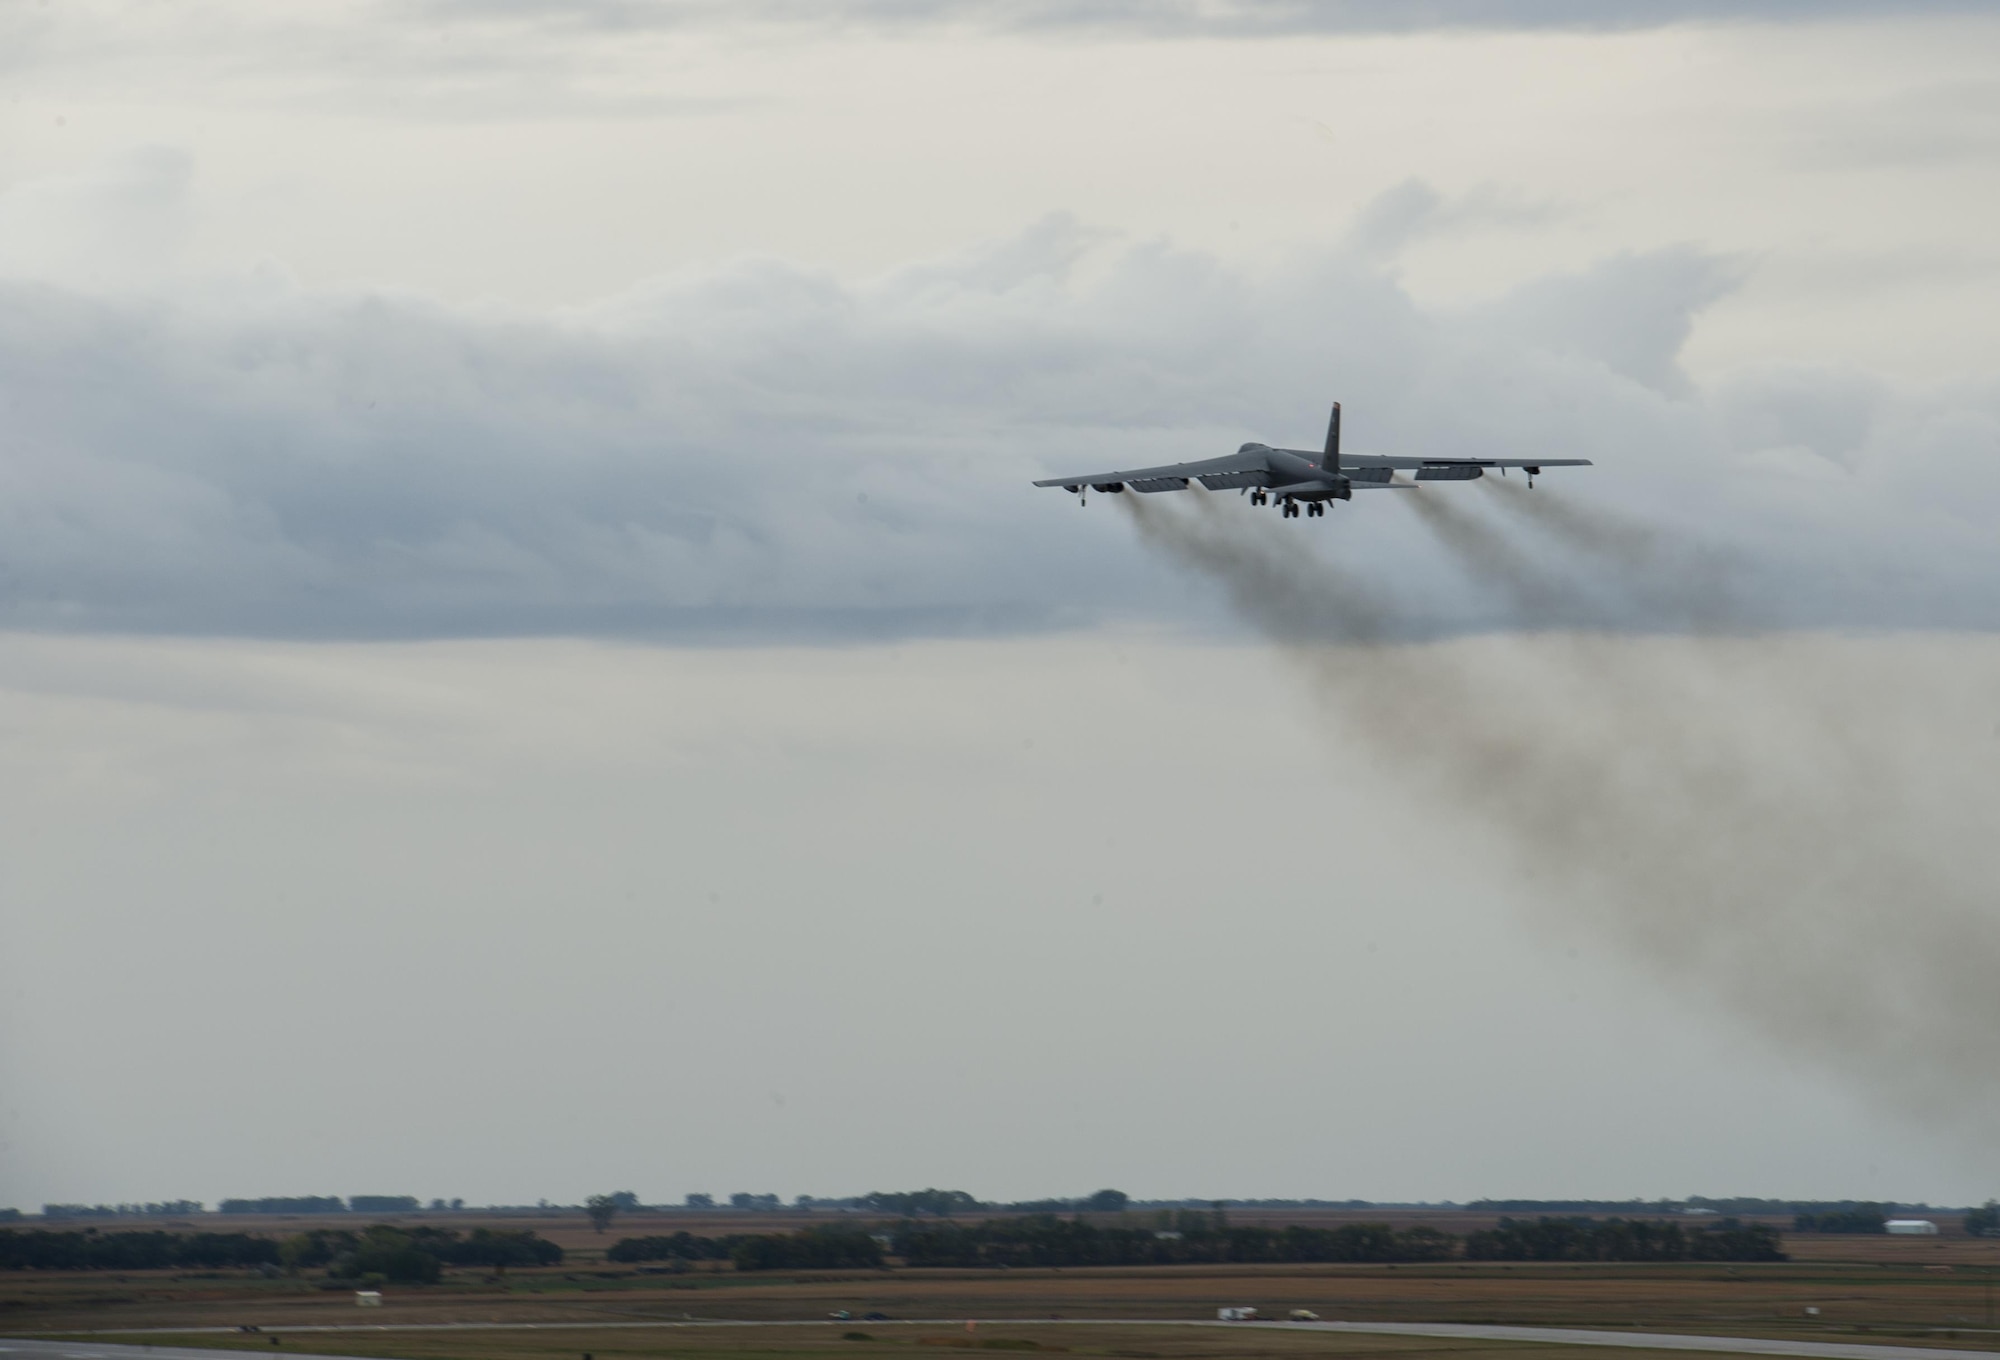 A B-52H Stratofortress takes off during a rapid launch for exercise Prairie Vigilance 16-1 at Minot Air Force Base, N.D., Sept. 16, 2016. Approximately 3,500 Airmen from across the 5th Bomb Wing demonstrated safe, secure, reliable nuclear-capable weapons standards and procedures during the weapons generations and fly-off. (U.S. Air Force photo/Airman 1st Class Christian Sullivan)